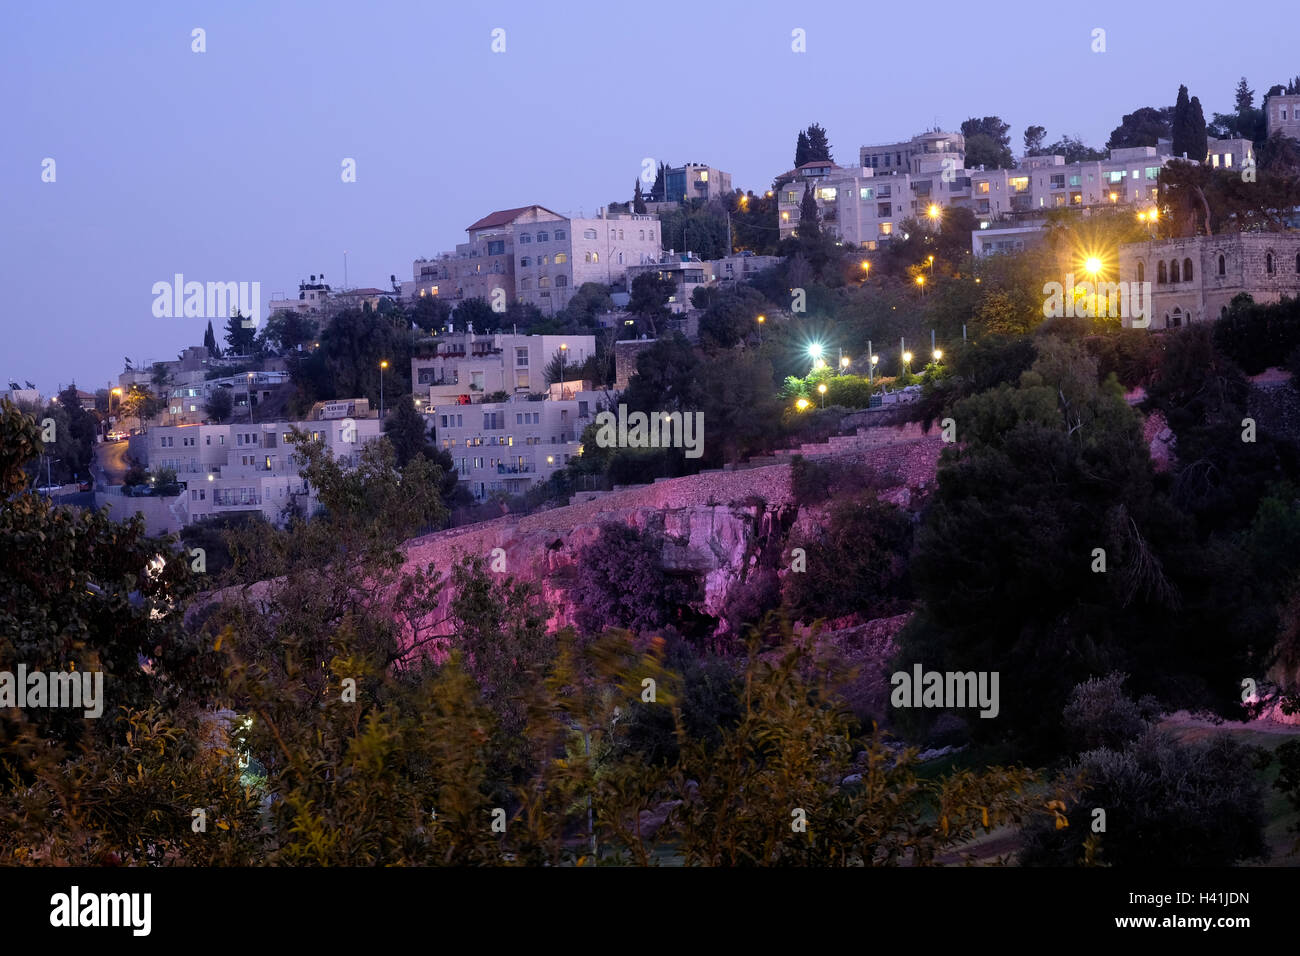 View at twilight toward Abu Tor a mixed Jewish and Arab neighborhood located over valley of Hinnom the modern name for the biblical Gehenna or Gehinnom valley surrounding Jerusalem's Old City, Israel Stock Photo